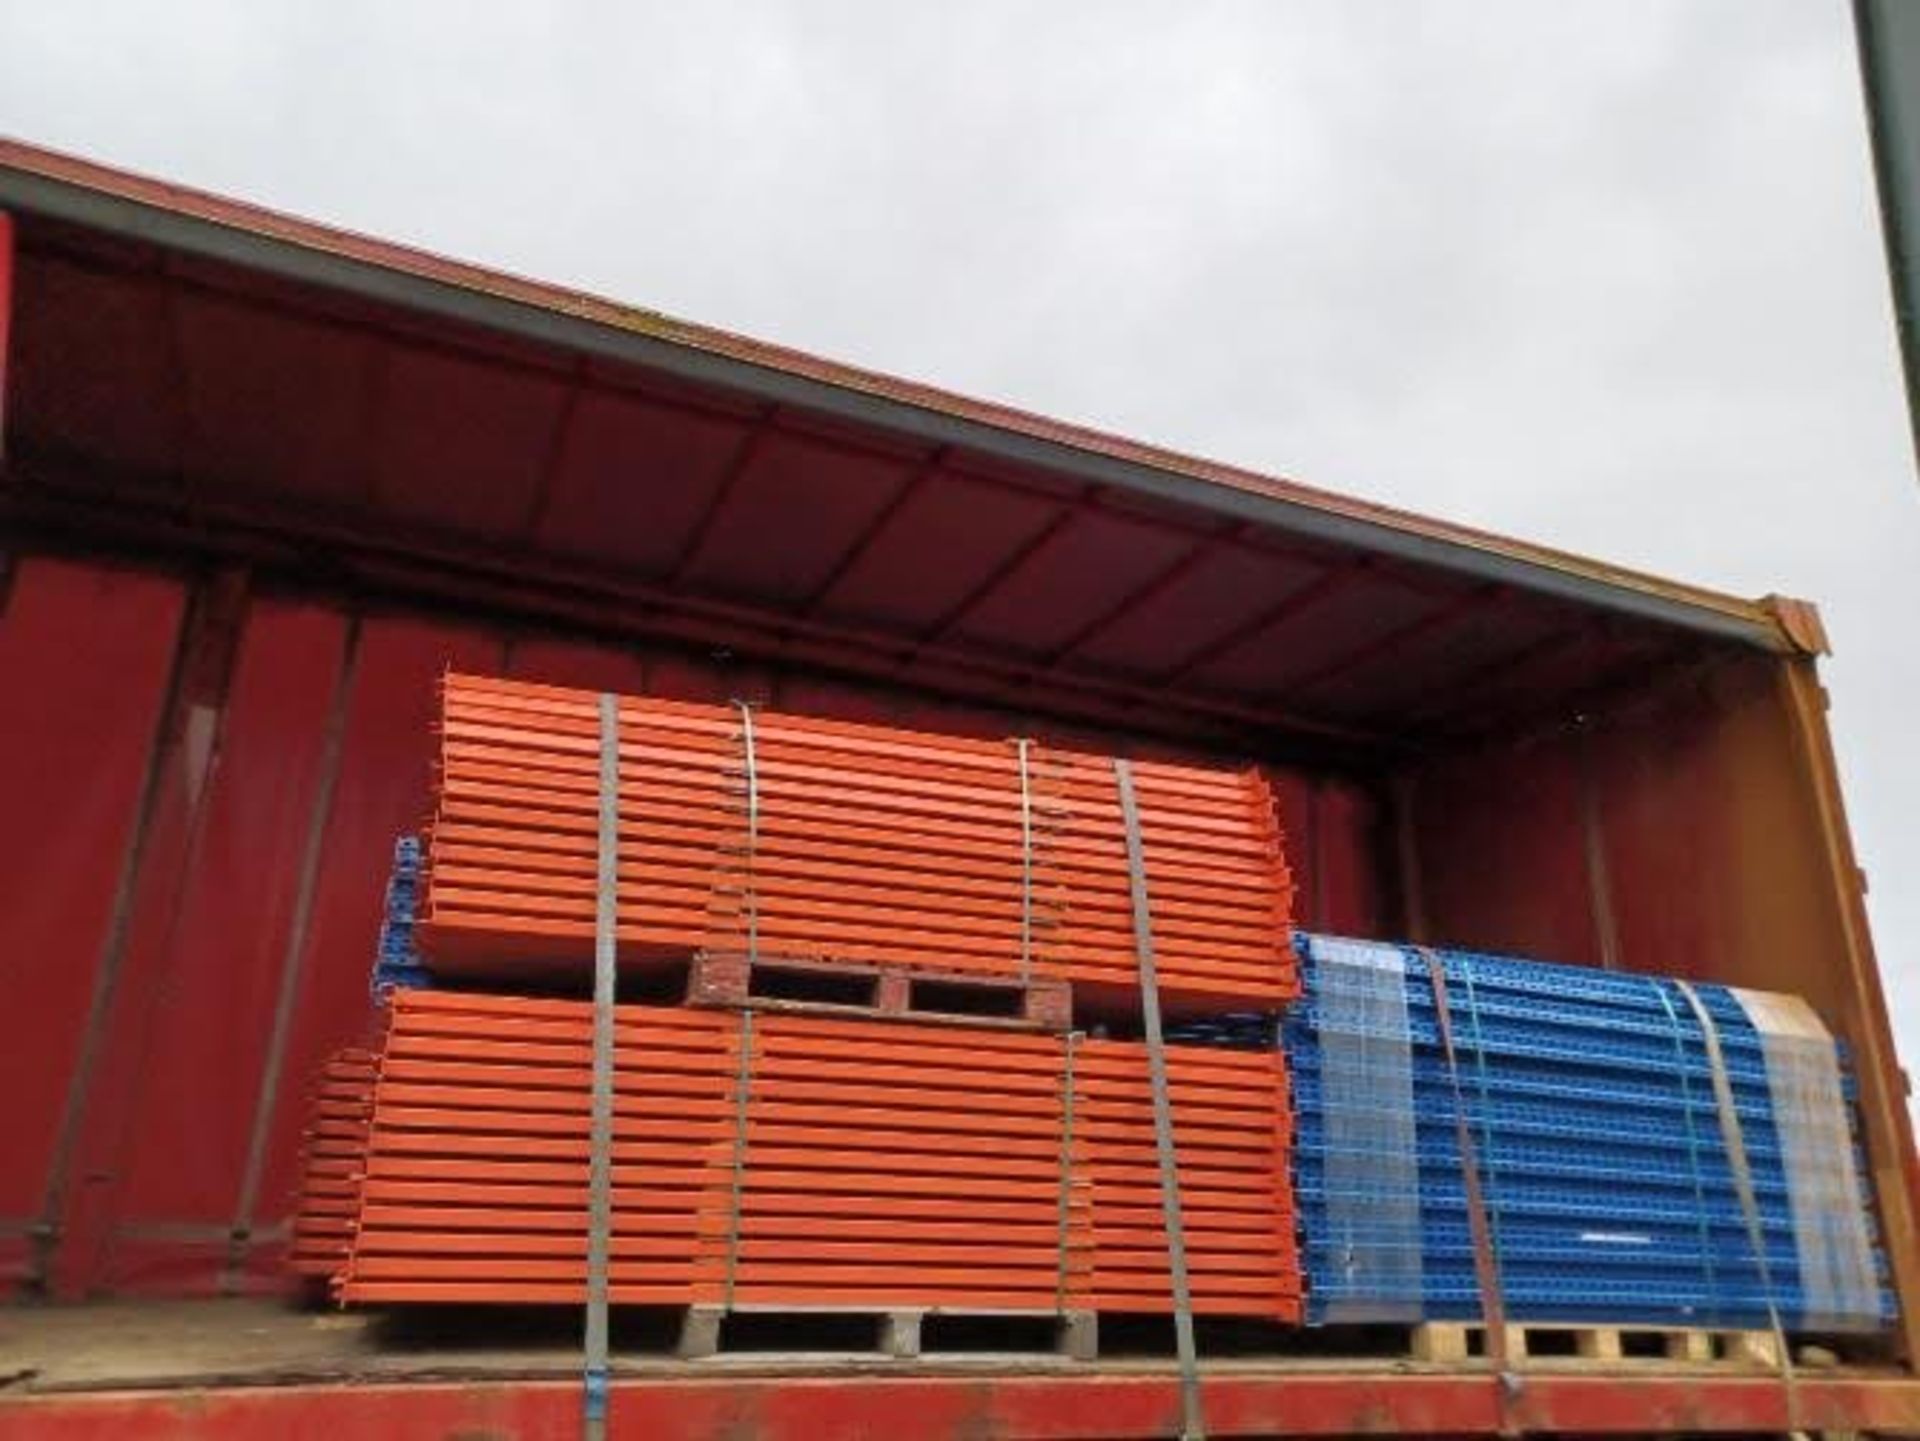 AS NEW PALLET RACKING - 8FT HIGH, 12FT LONG, 41î WIDE - APROXIMATELY 50 BAYS *PLUS VAT*